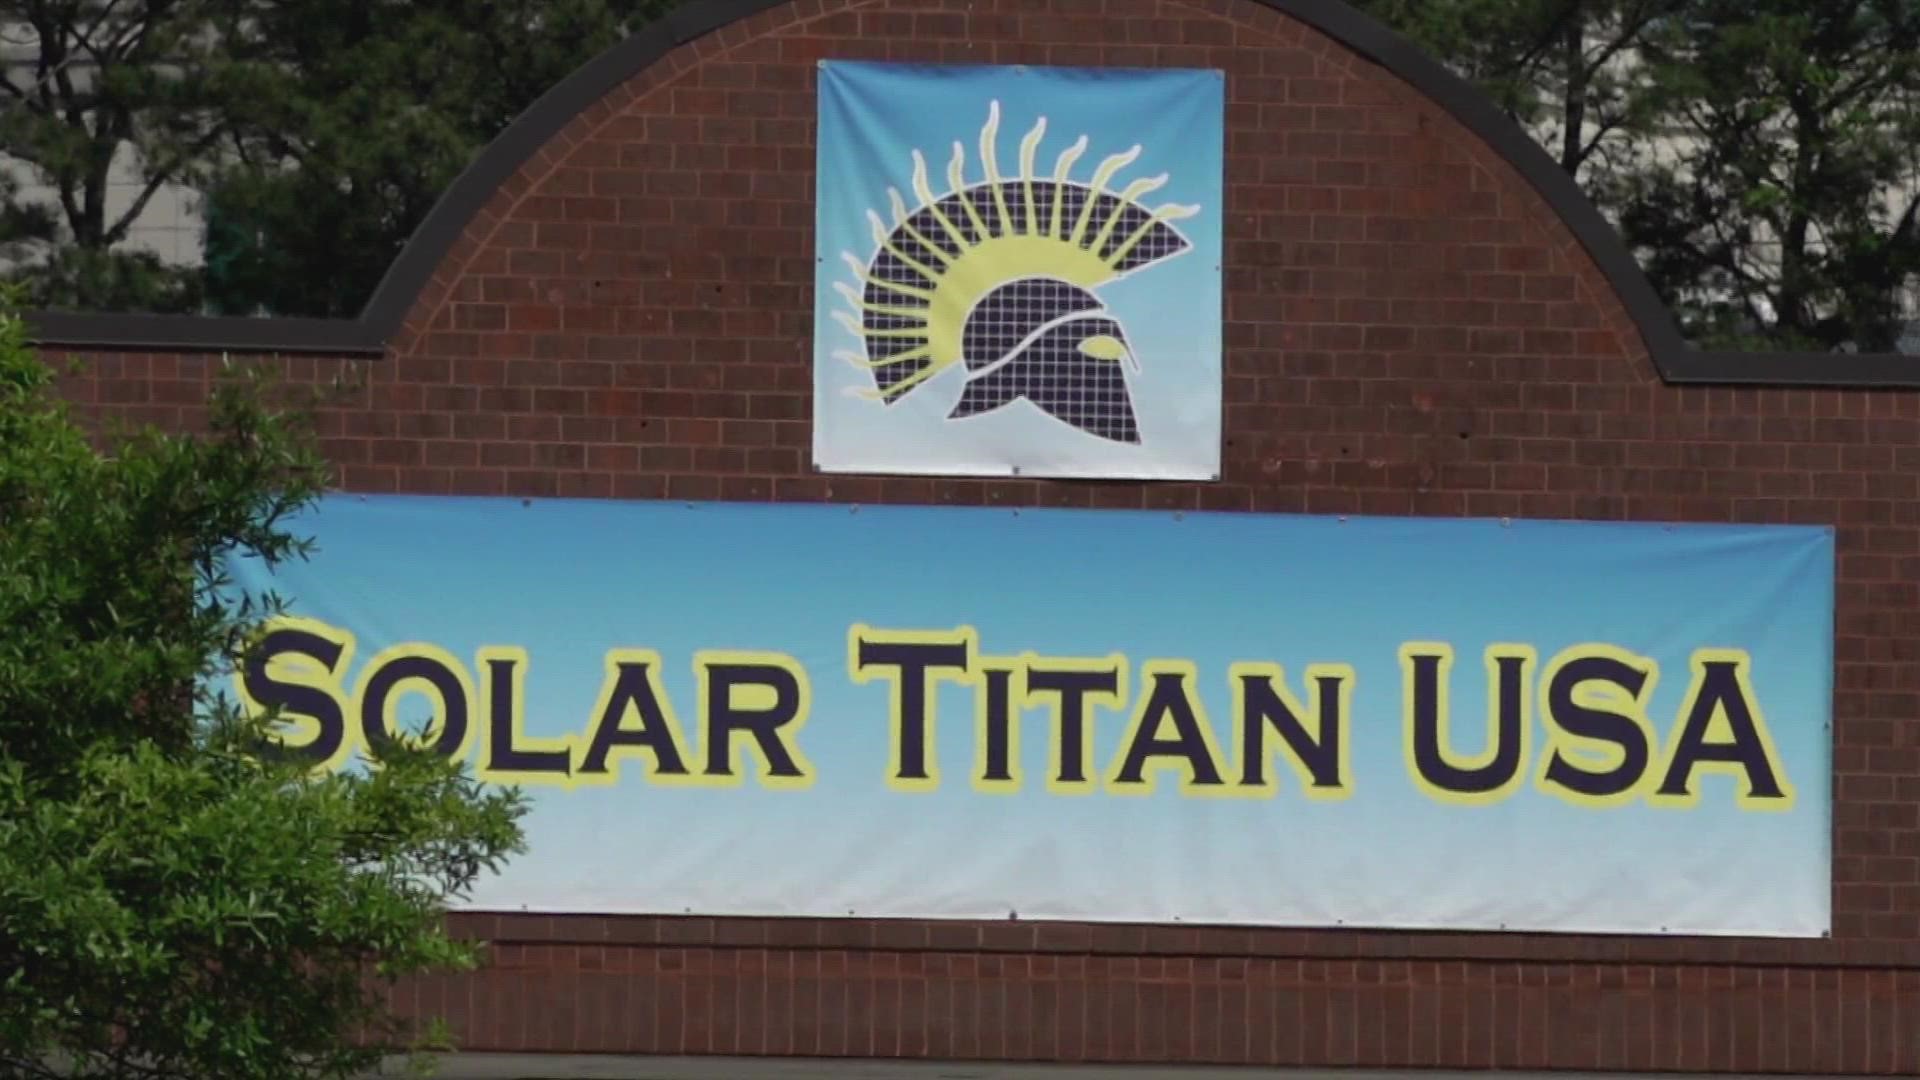 Solar Titan said failing parts from Generac are responsible for "faltering" the company.